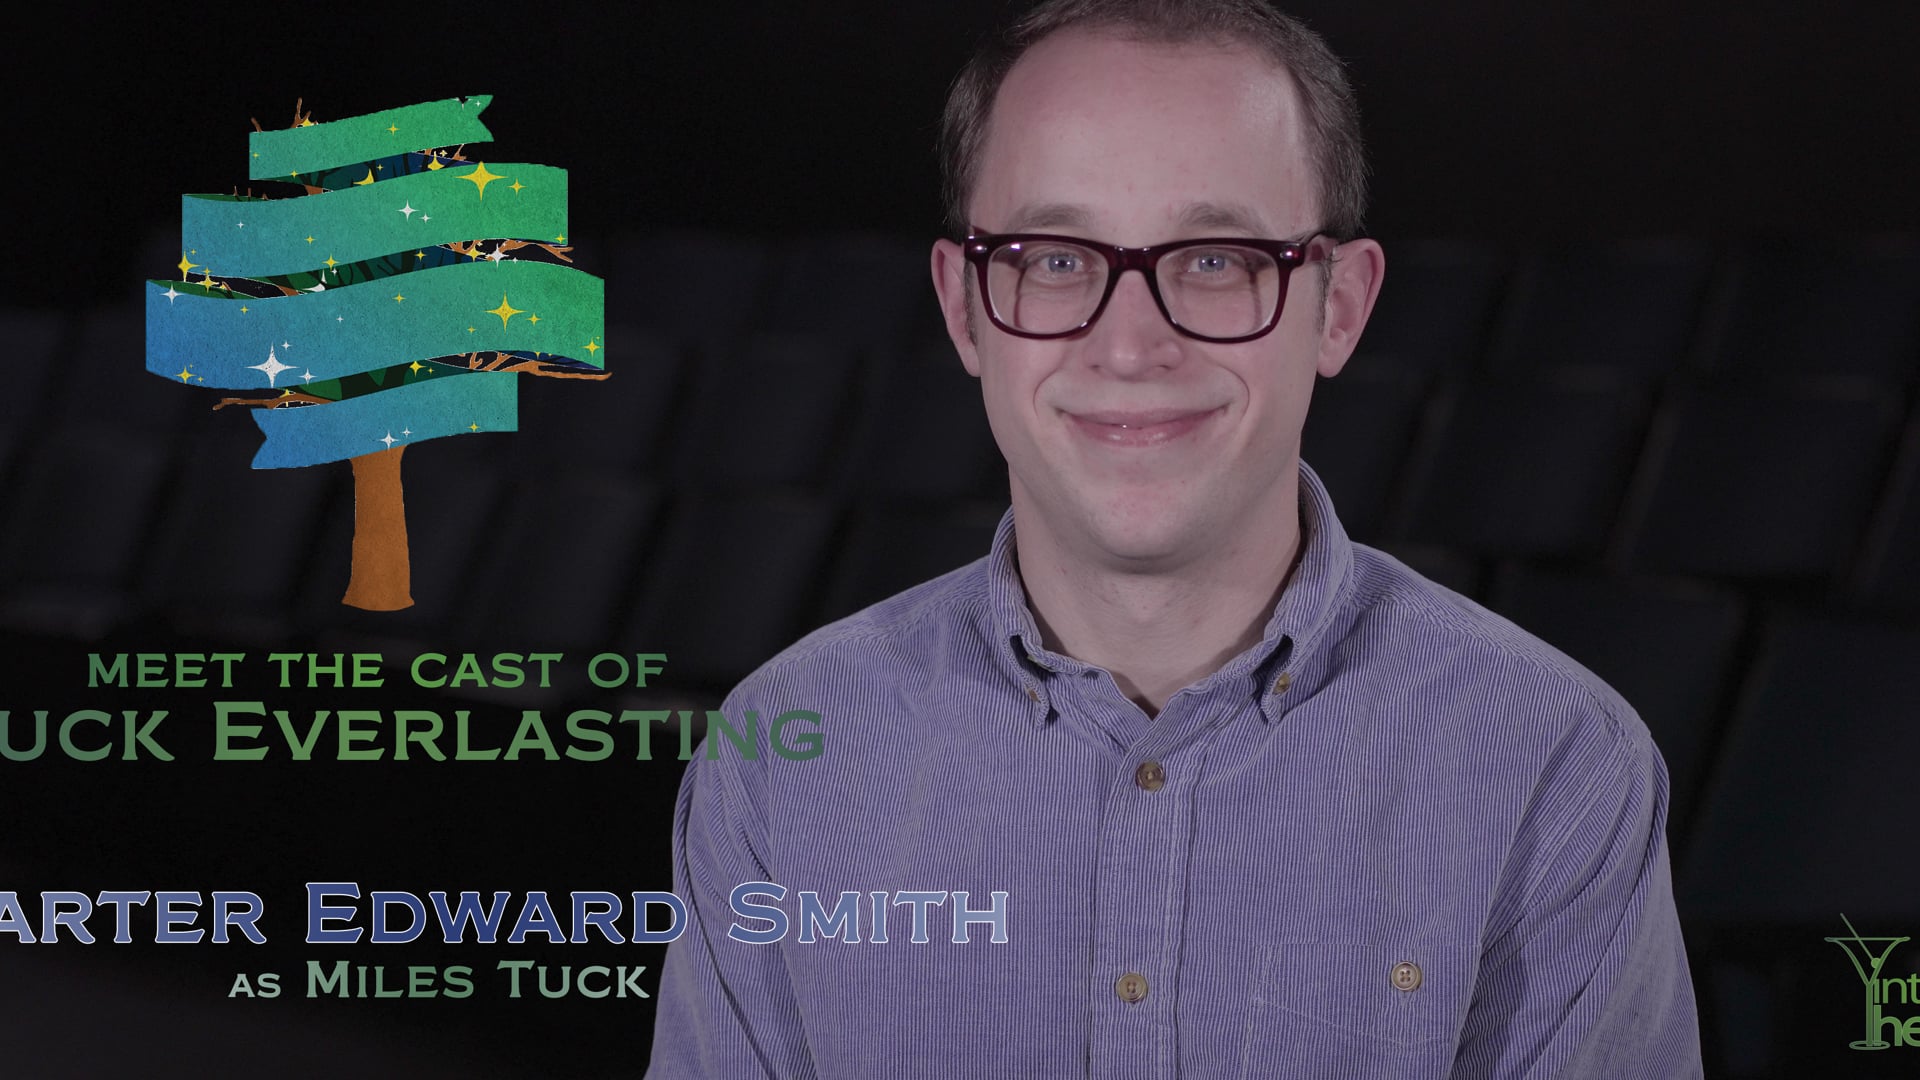 Meet the Cast of Tuck Everlasting (Carter Edward Smith as Miles Tuck)